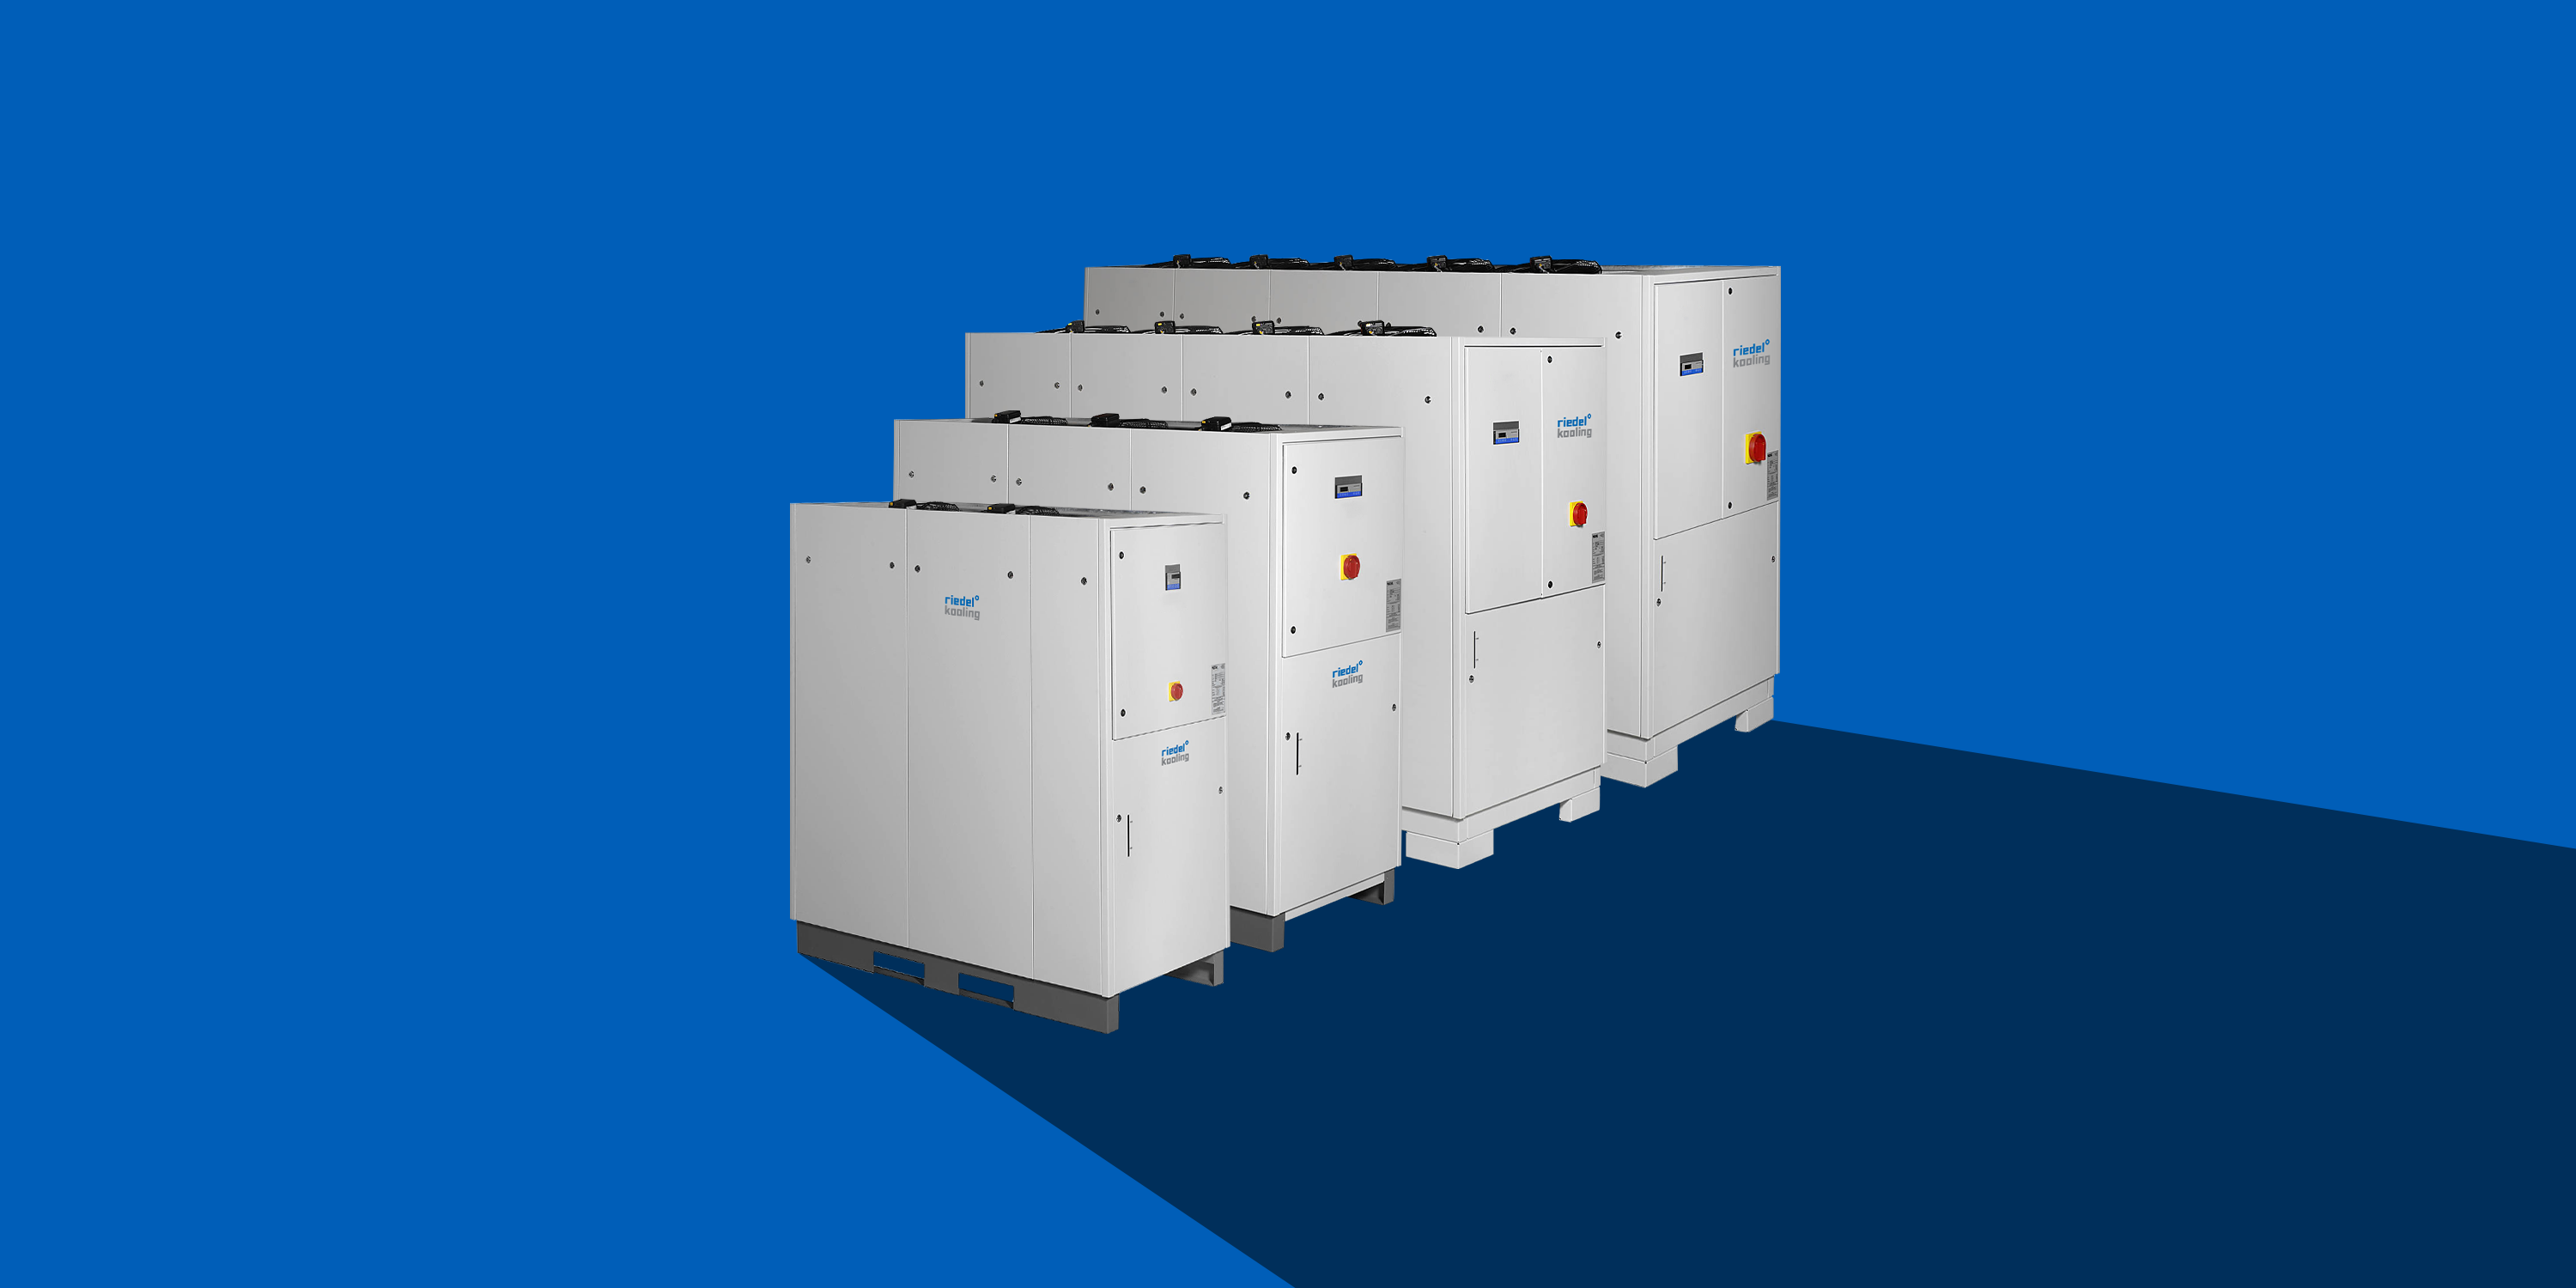 Platform-based standard models for precise, reliable cooling. All cooling block systems are compact, factory-assembled liquid cooling units suitable for a wide range of industrial applications. By using a wide variety of refrigerants, the chiller can be designed to meet specific needs.